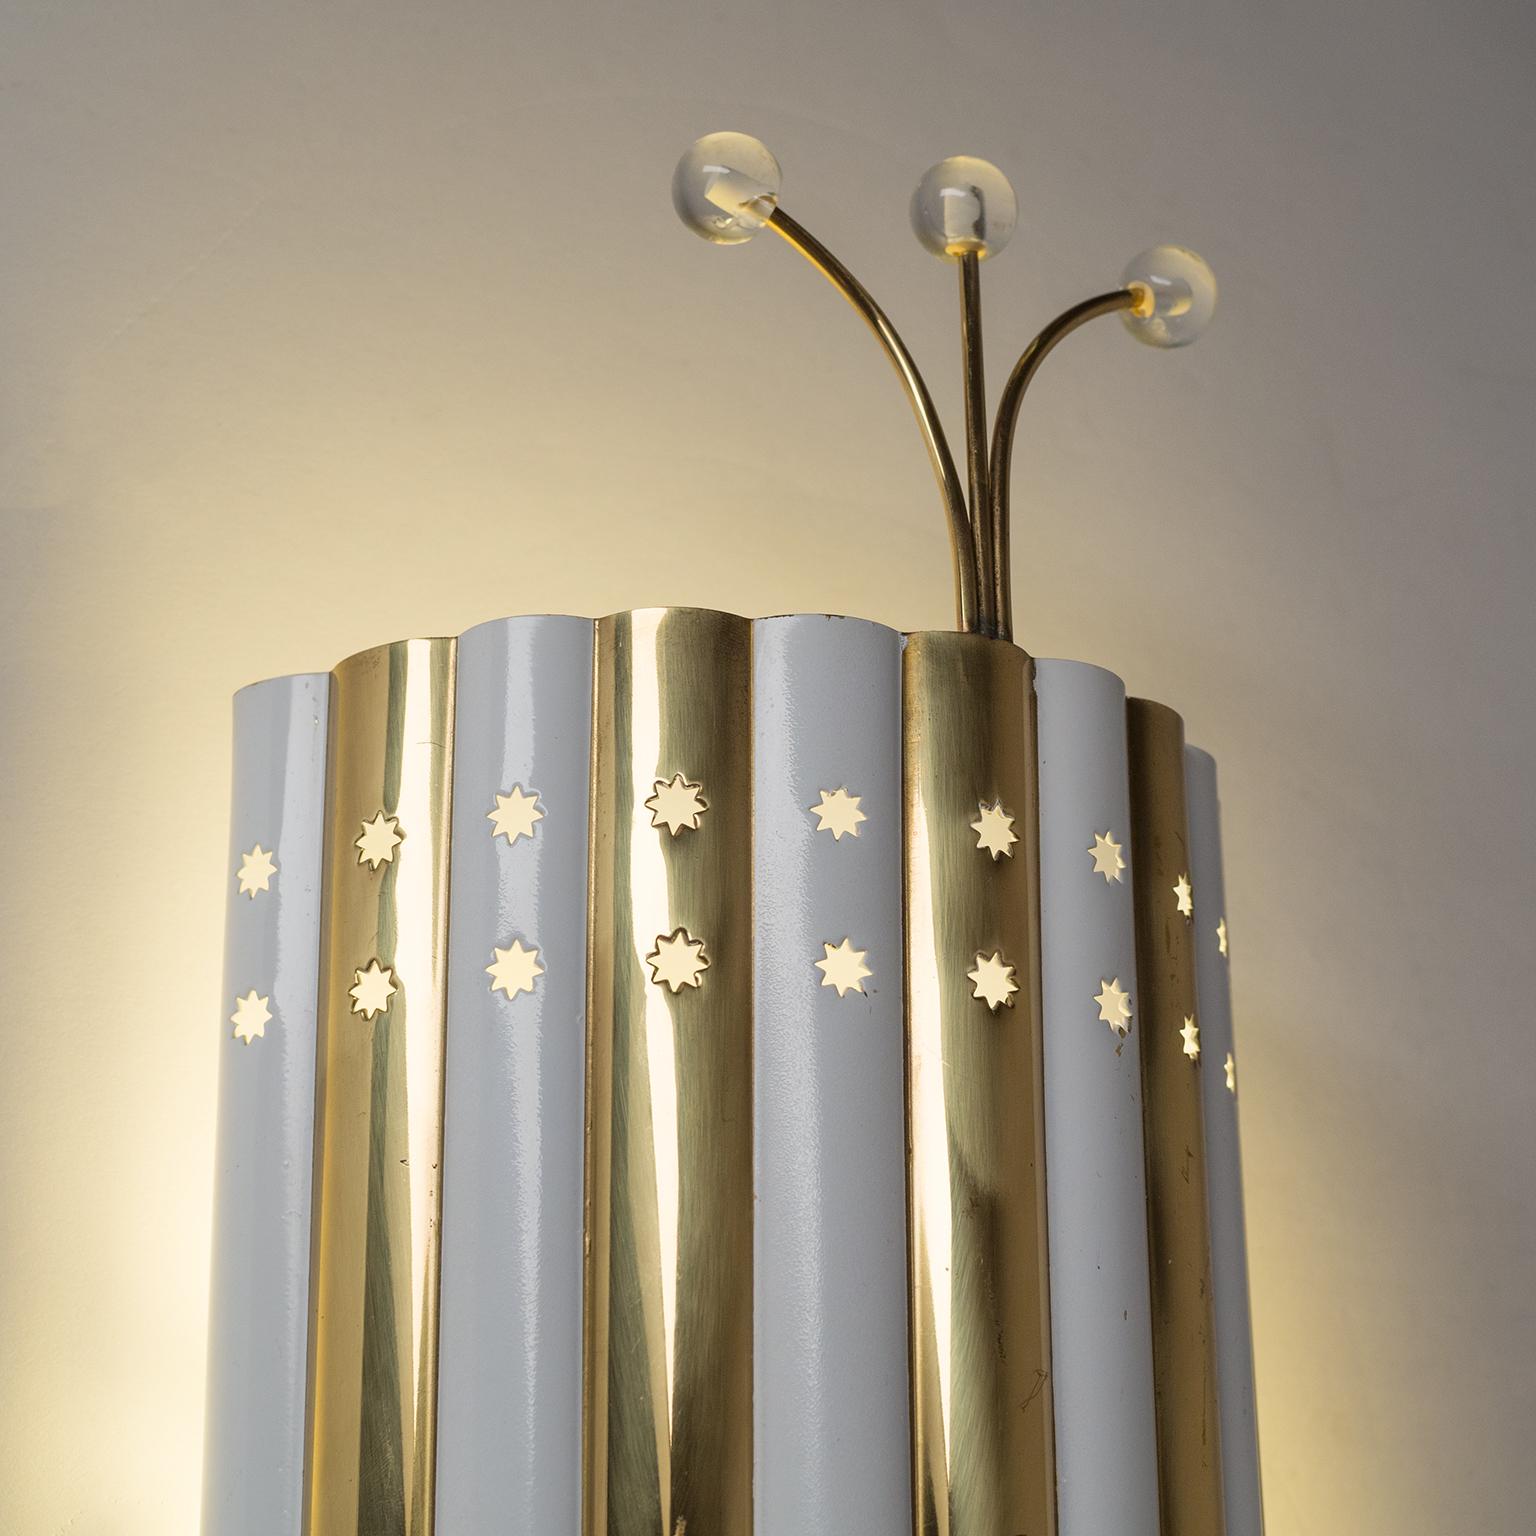 Austrian Rare Brass and Glass Sconces, 1950s For Sale